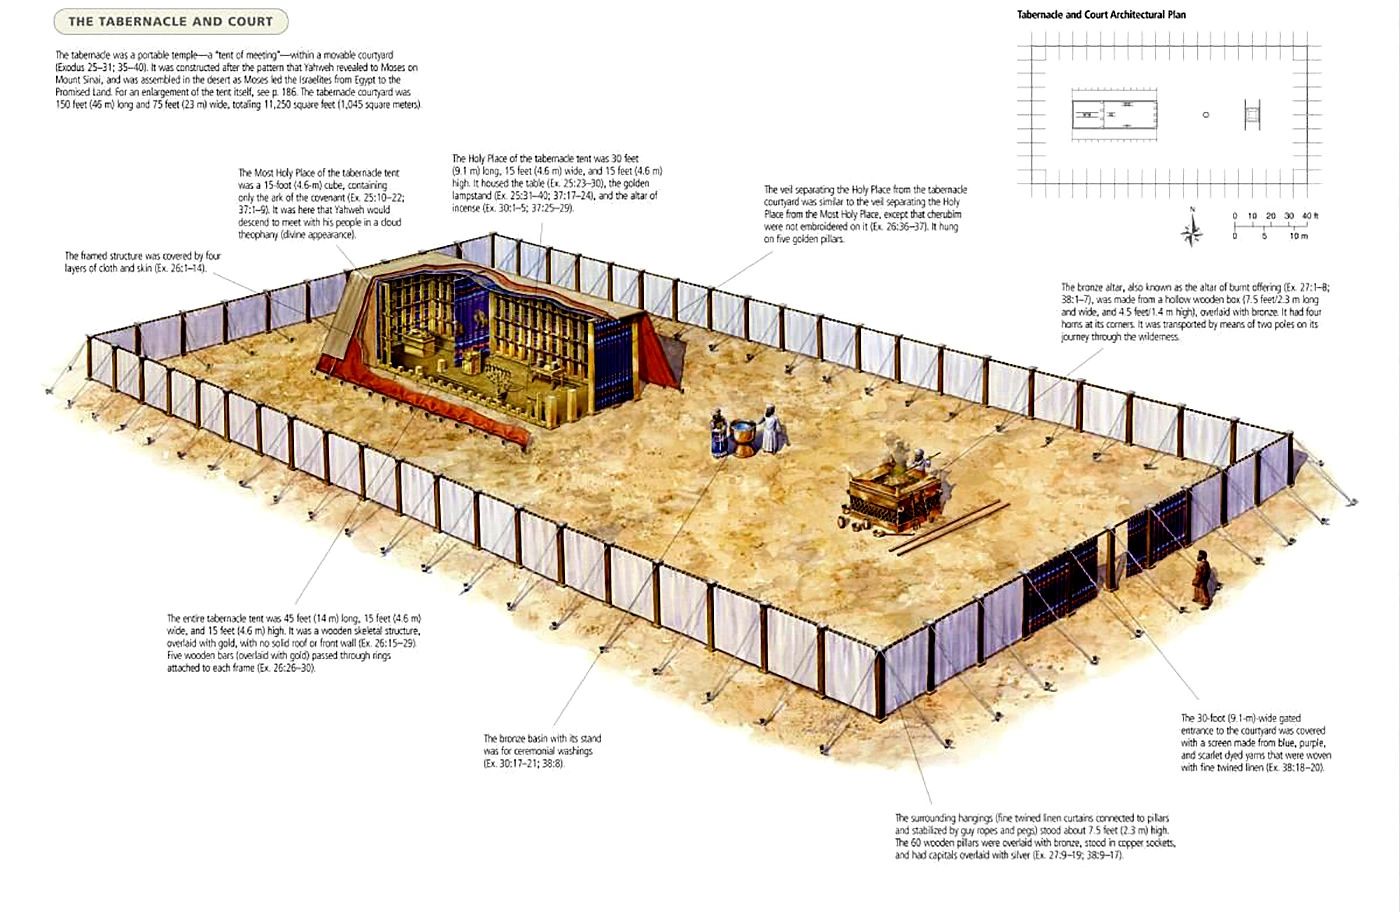 Image of the Tabernacle in the Wilderness as designed by Moses, per God's explicit instructions.